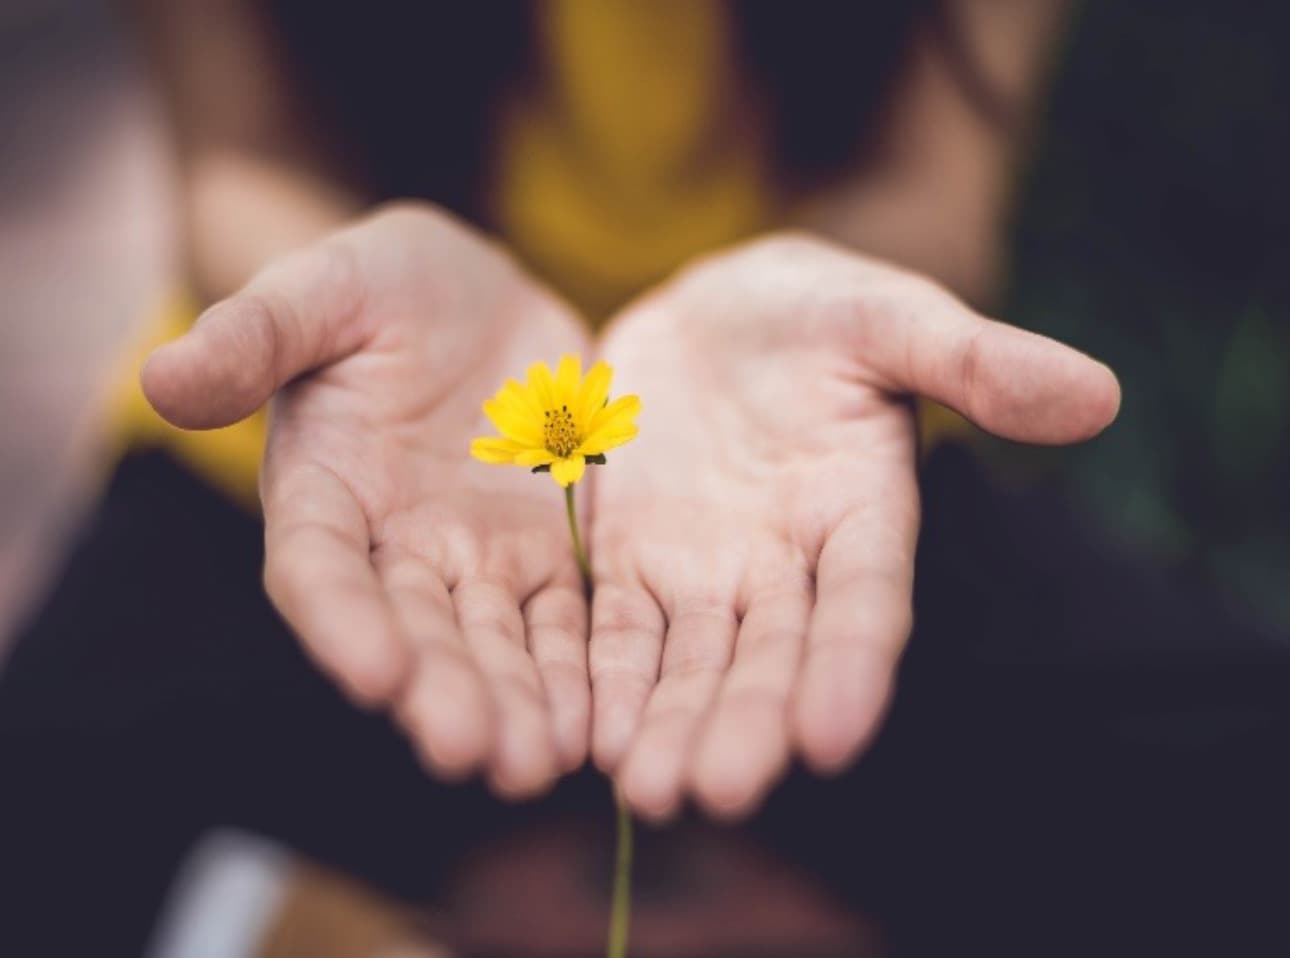 two hands palm up holding a small yellow flower